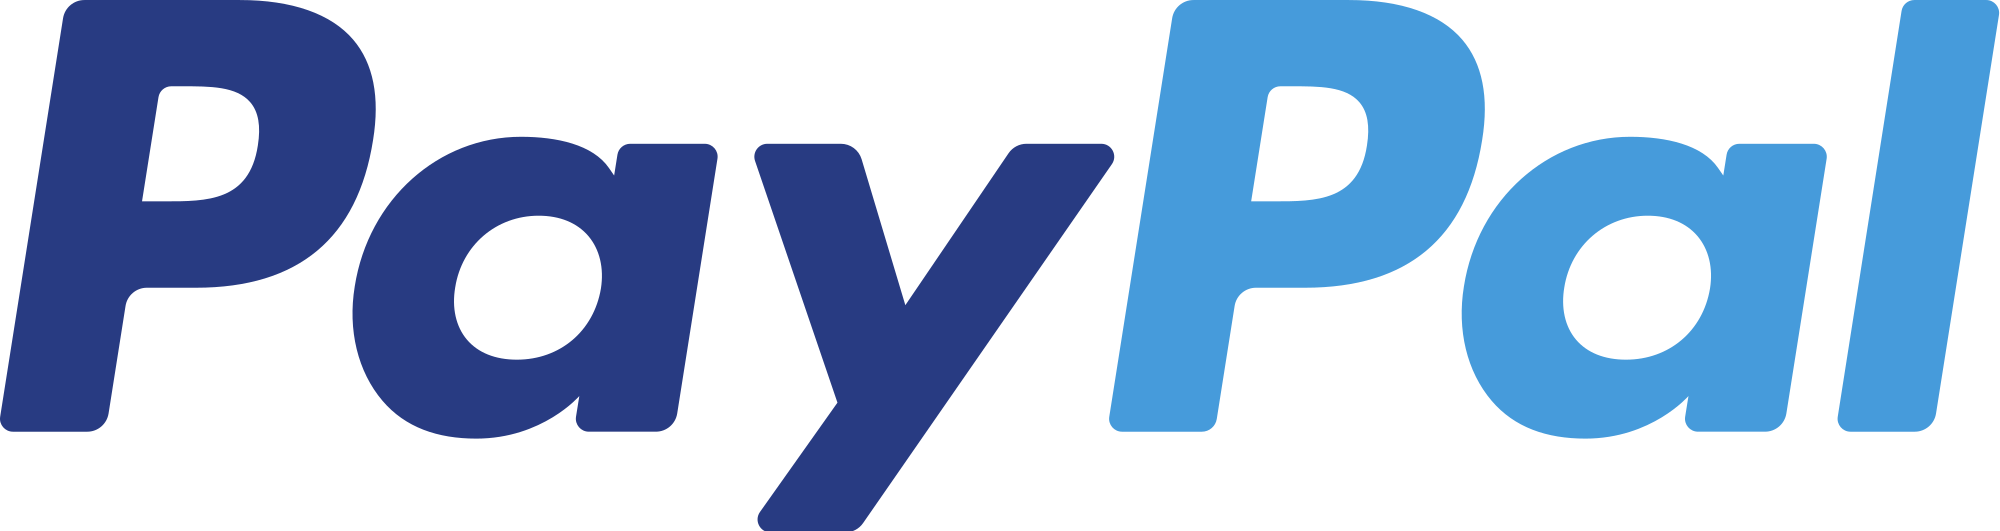 PayPal Logo PNG Picture